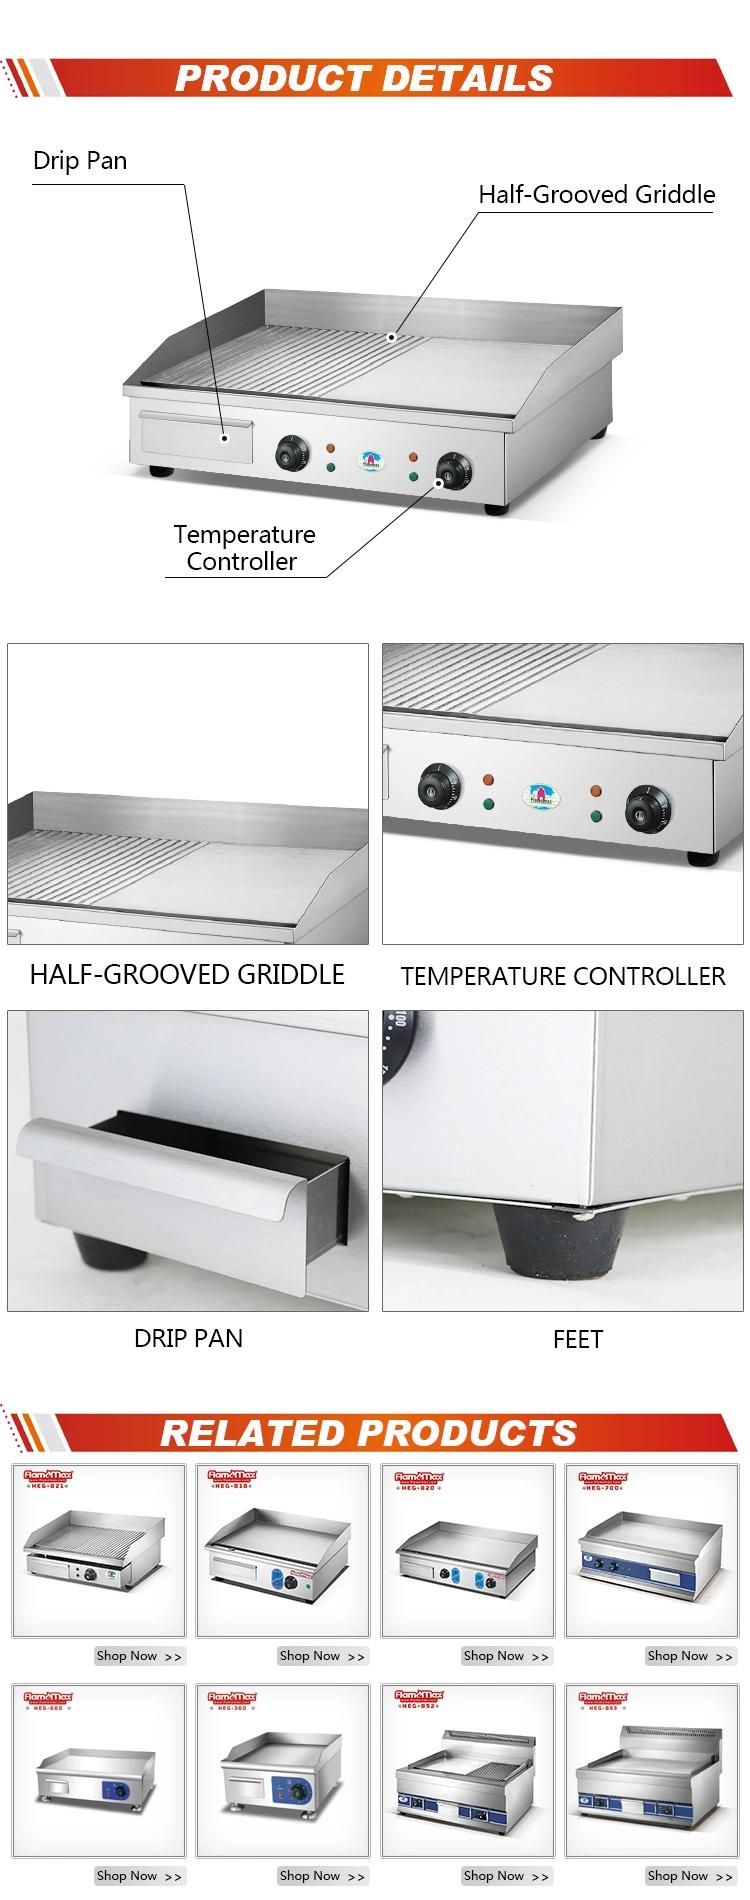 Heg-822 Counter Top Electric Half Flat Half Grooved Griddle